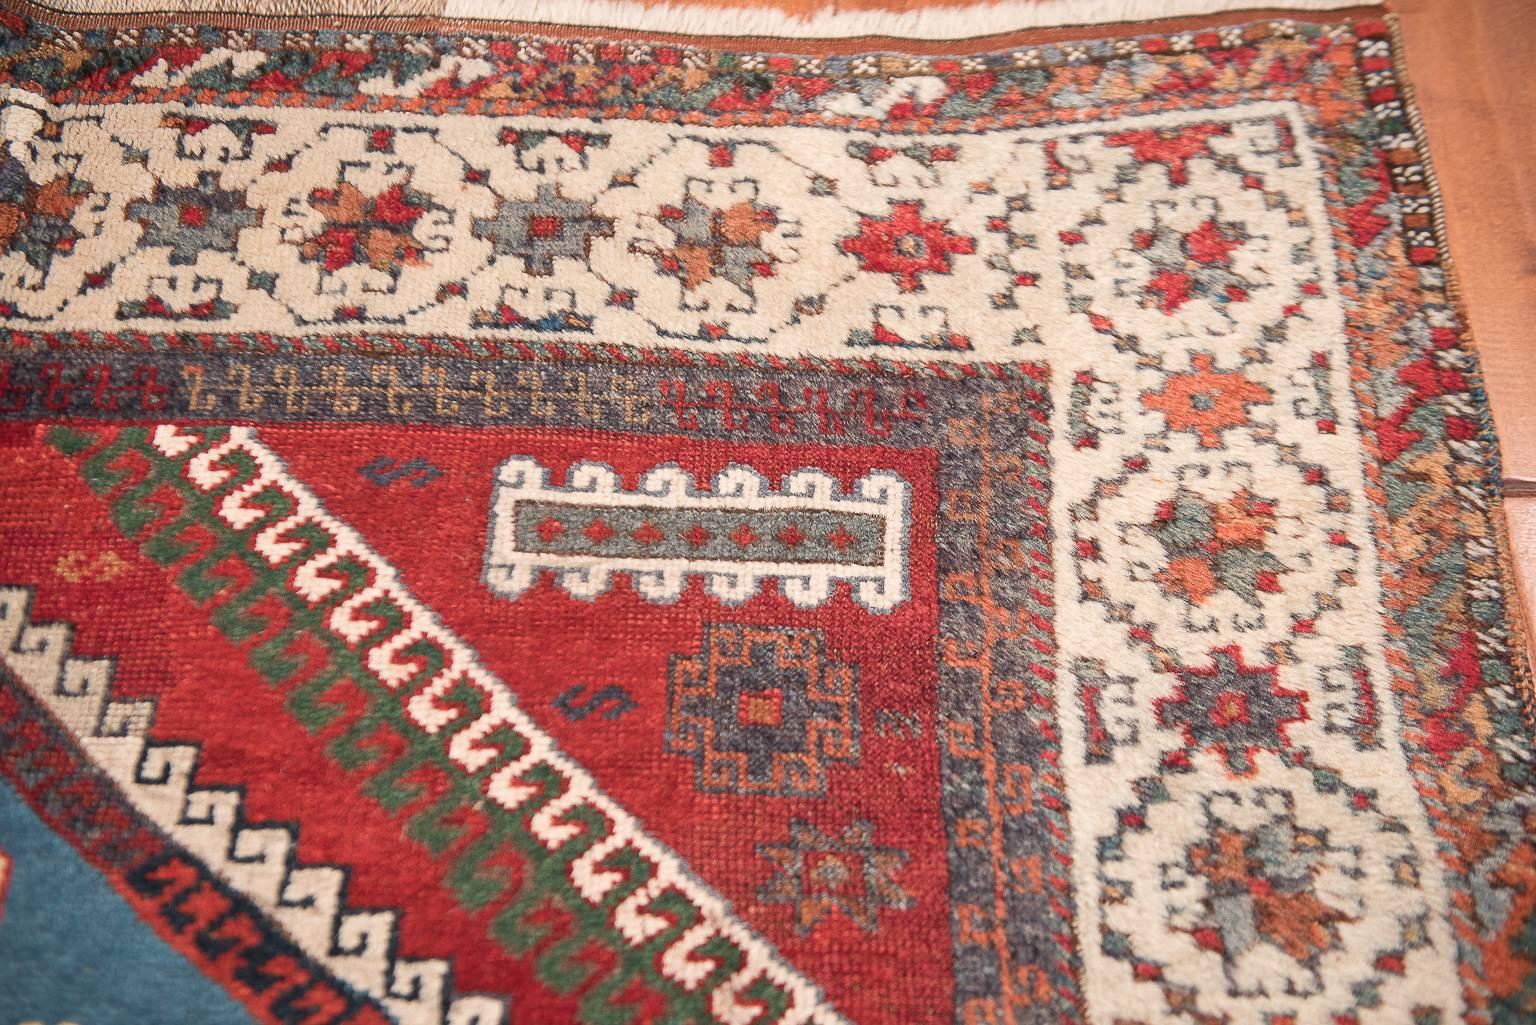 Tribal red antique Kurd carpet.
     Once wrongly identified as Northwest Persian or Caucasian village weaving, antique Kard, or Kurdish rugs have only recently been acknowledged for their unique type of design and dying method. Utilizing a set of